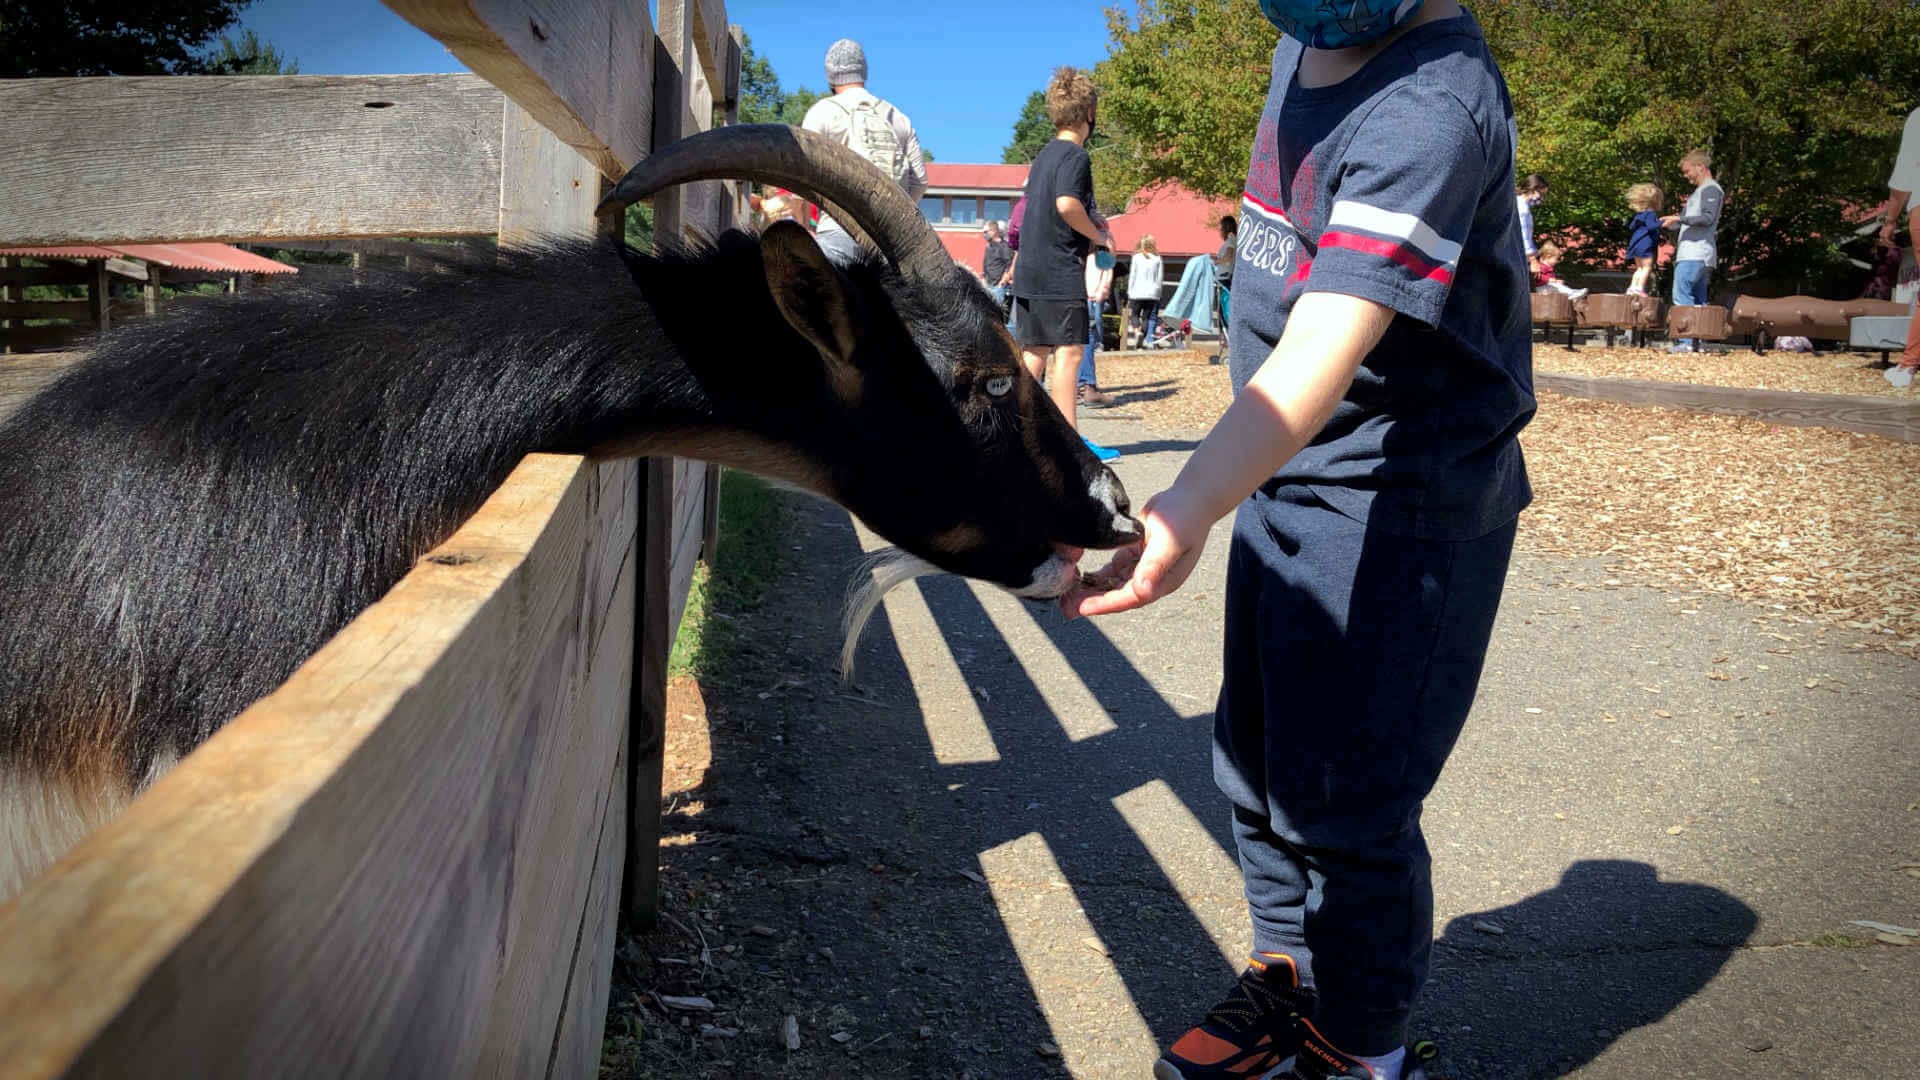 While we didn't find time to travel far this month, we did go on little outings around VA and take the nephews out. Great weather and a little fun with the farm animals! Don't worry, this goat didn't eat our picnic.